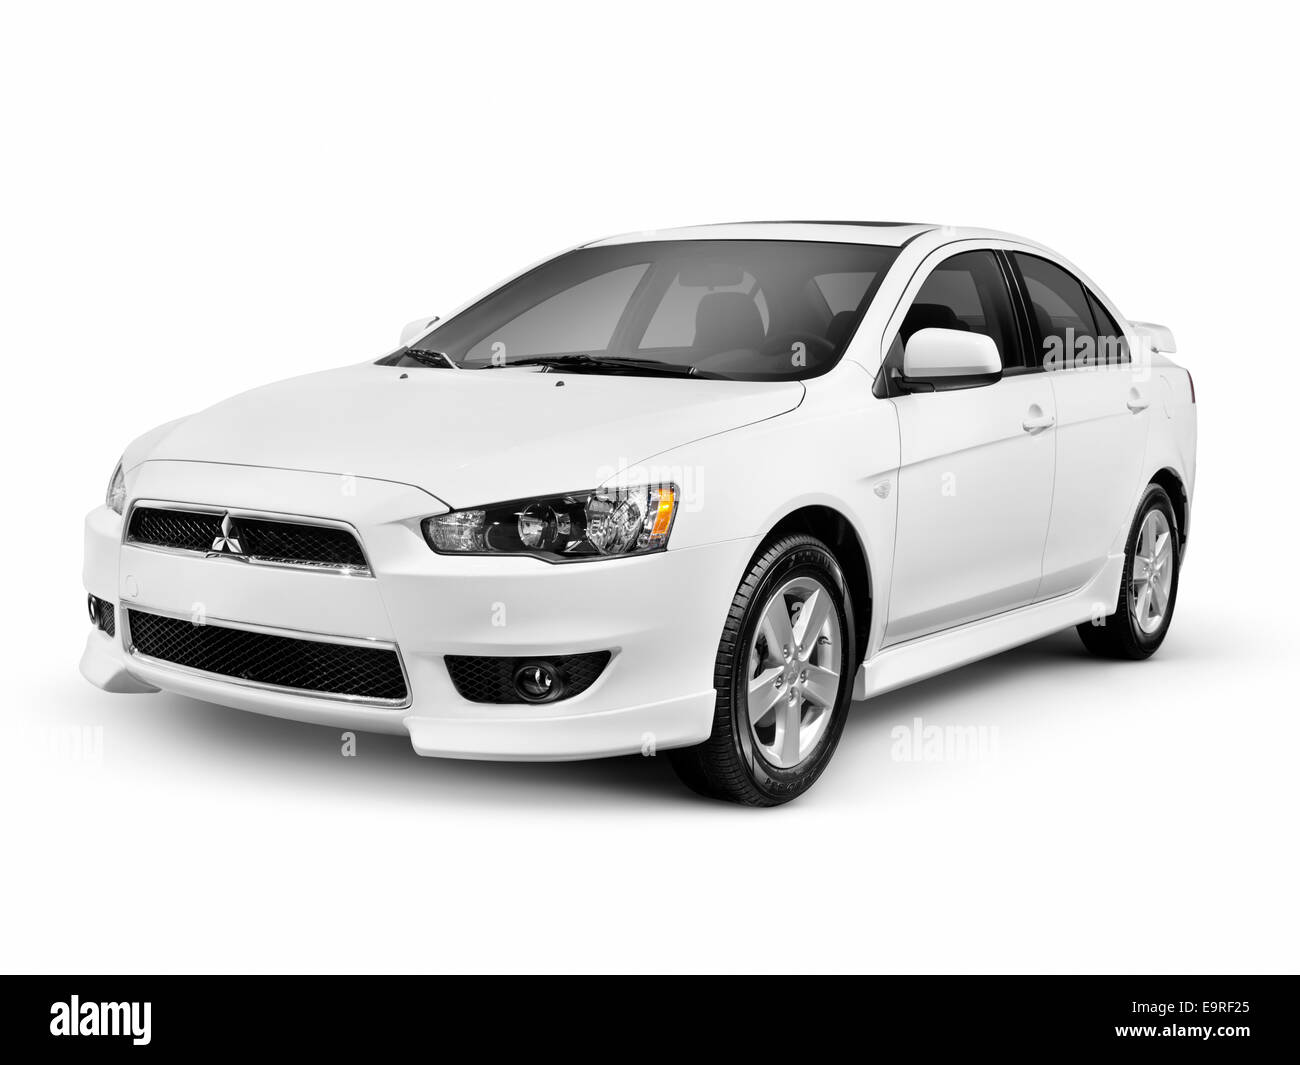 White 2014 Mitsubishi Lancer compact car isolated on white background with clipping path Stock Photo